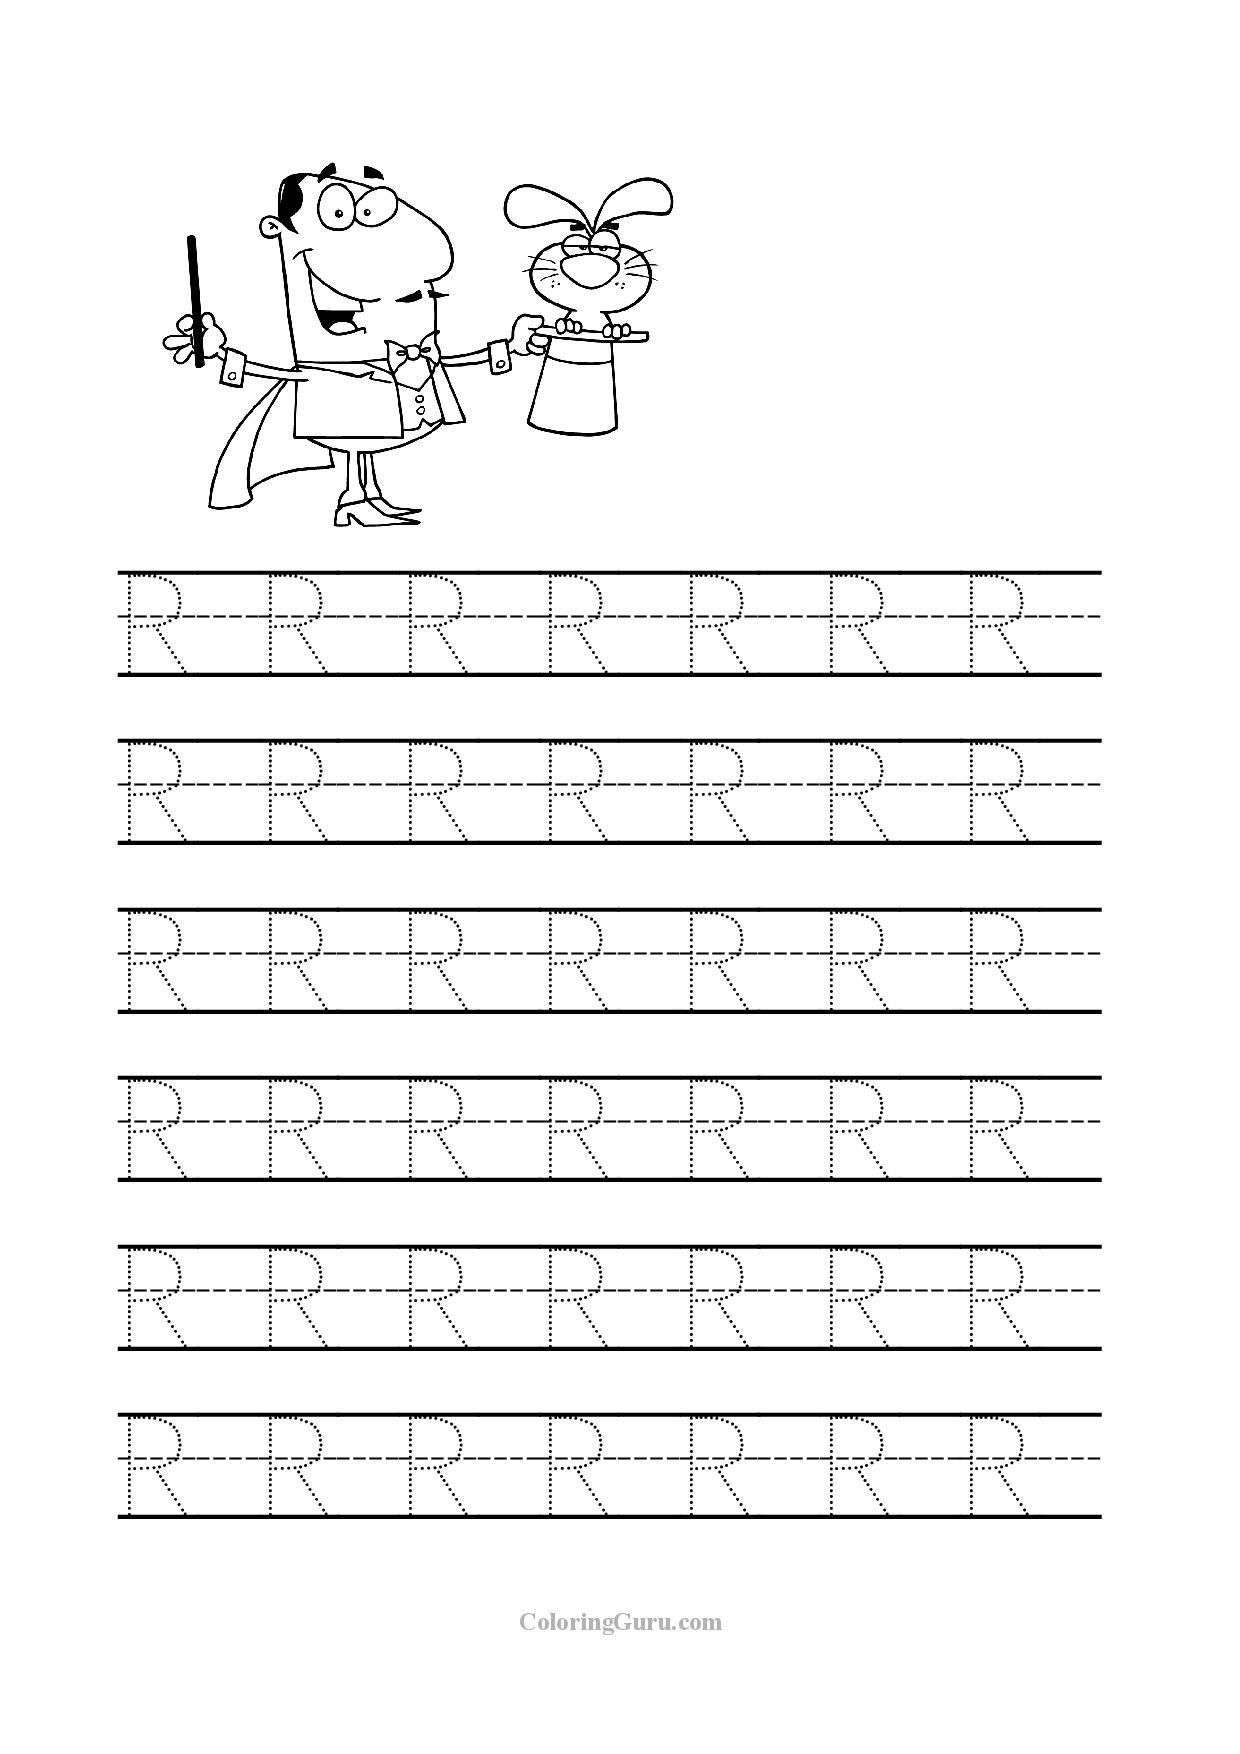 51 Grade R Alphabet Worksheets In 2020 | Tracing Letters throughout Letter R Tracing Sheets